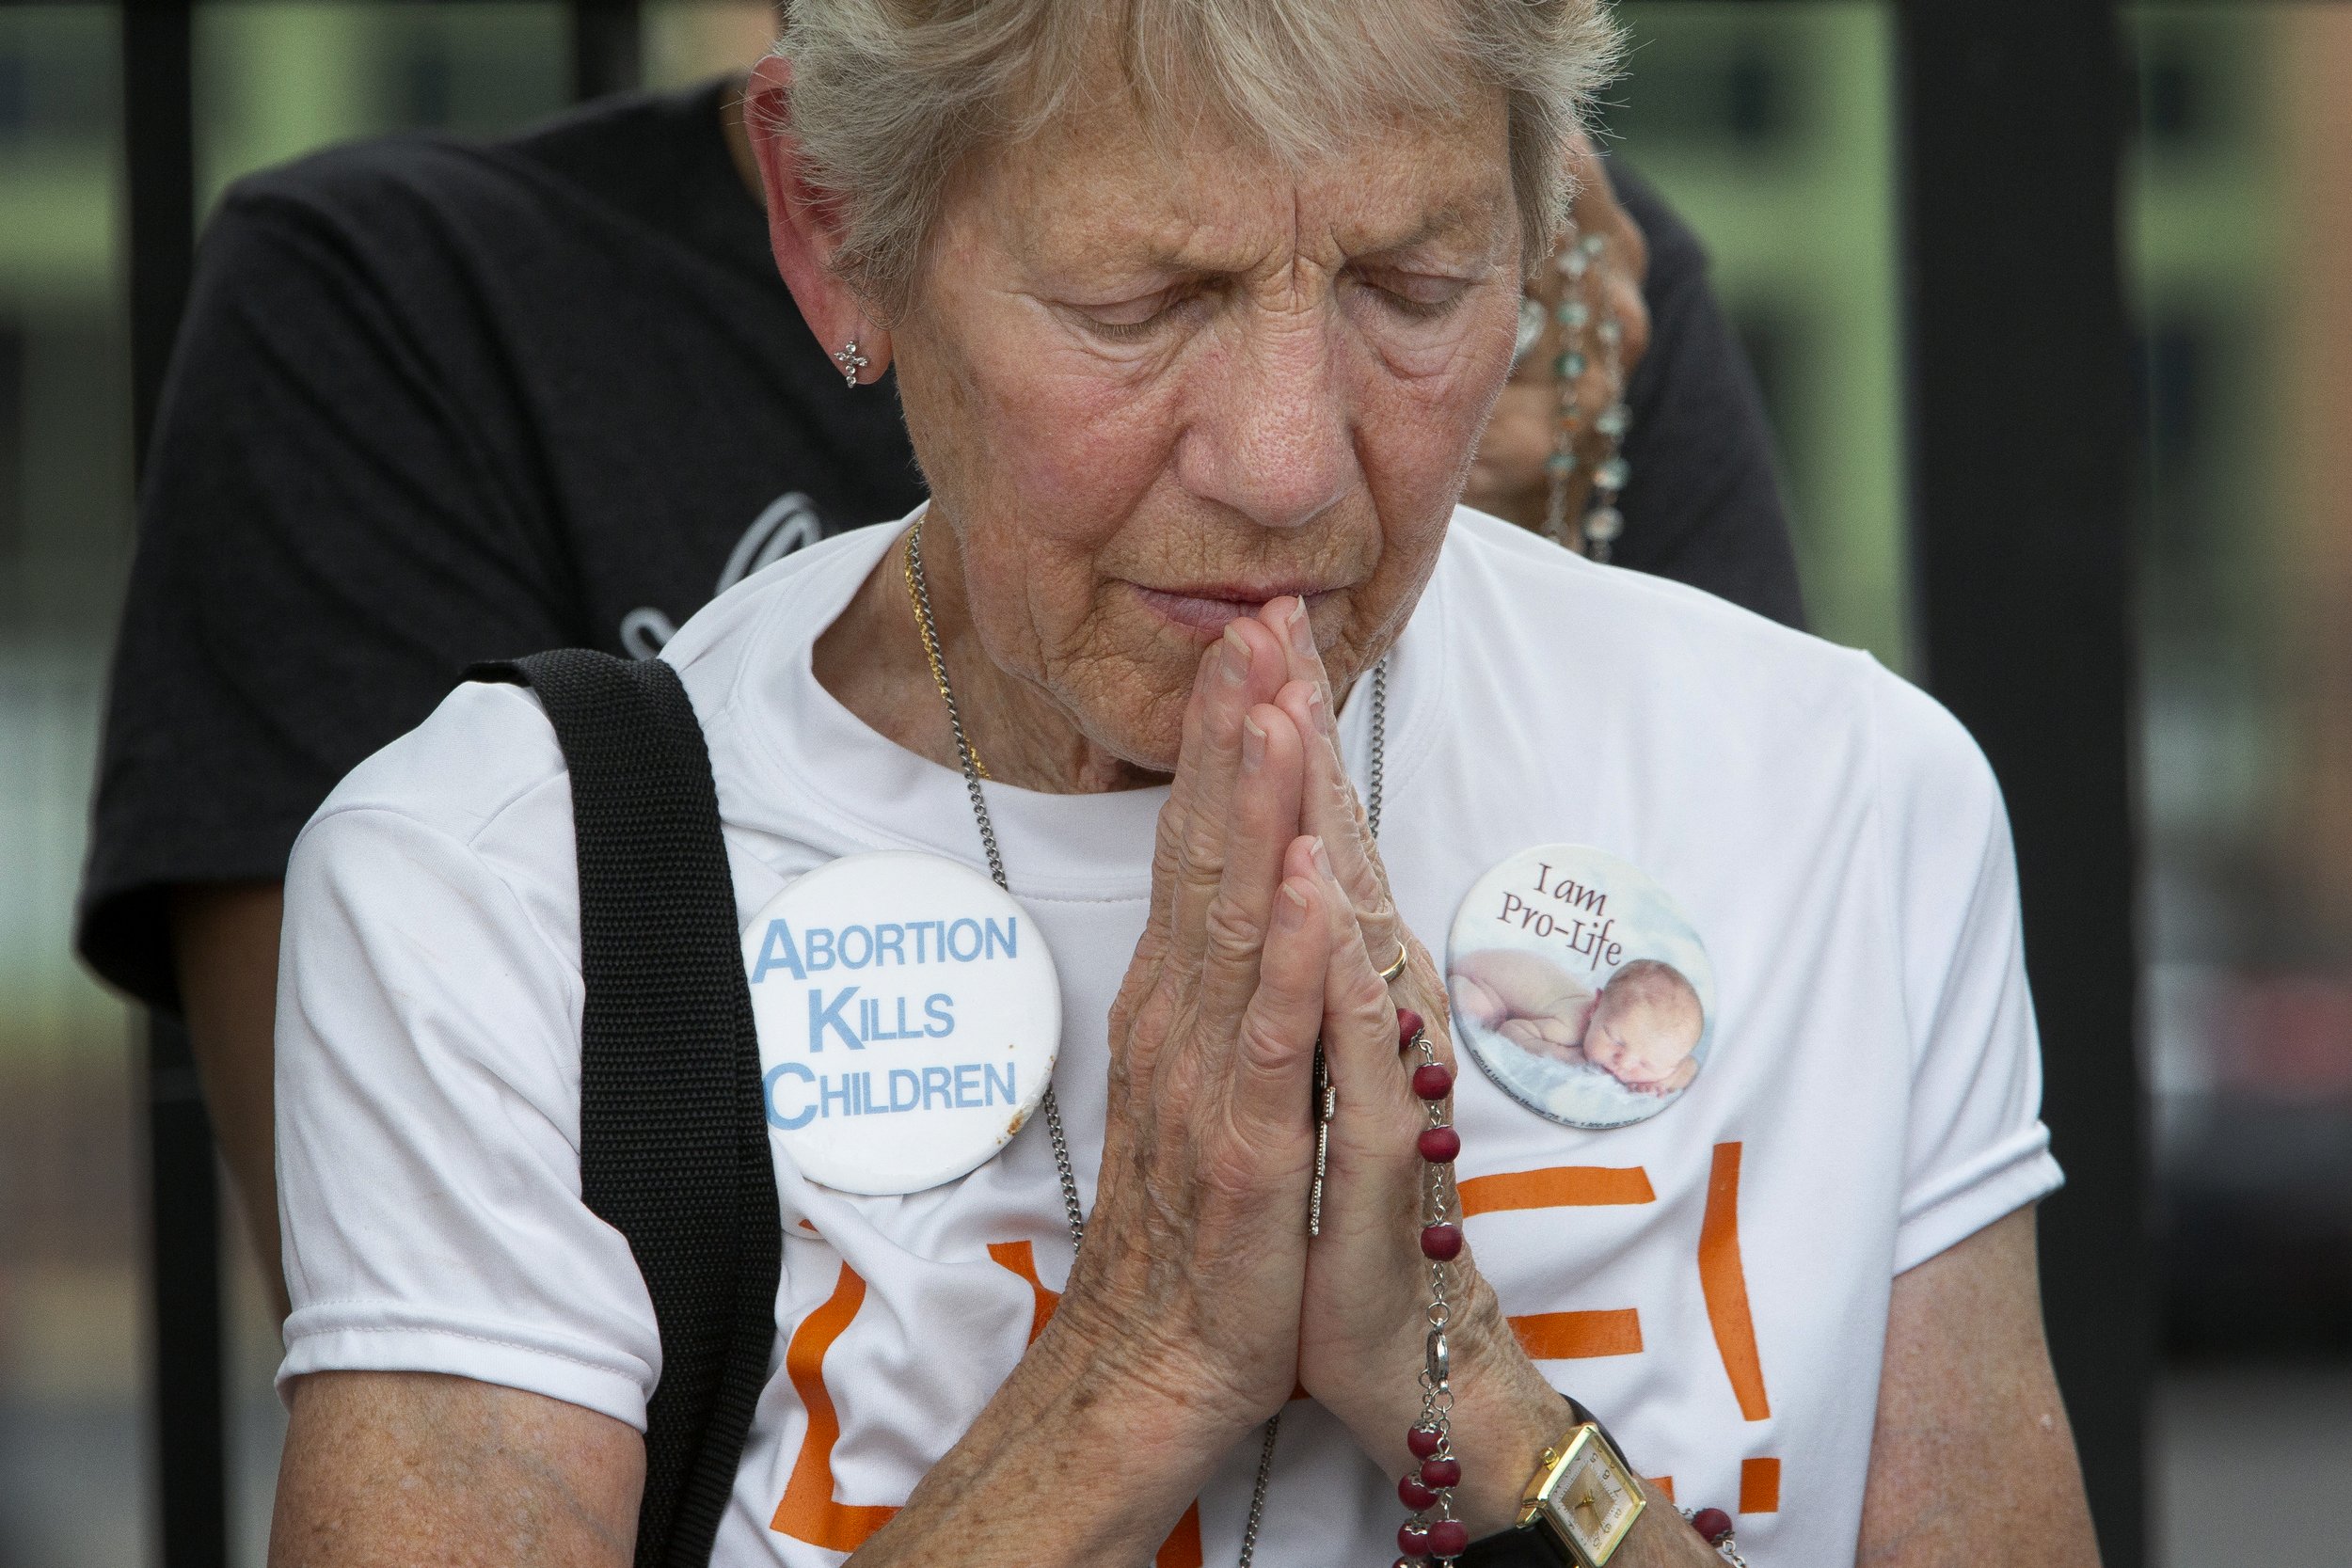  Rita Sparrow, a parishioner at St. Elizabeth Ann Seton Parish in St. Charles, folded hands as a priest spoke during a gathering June 24 outside Planned Parenthood in St. Louis, Missouri. Earlier in the day, the Supreme Court released its decision in